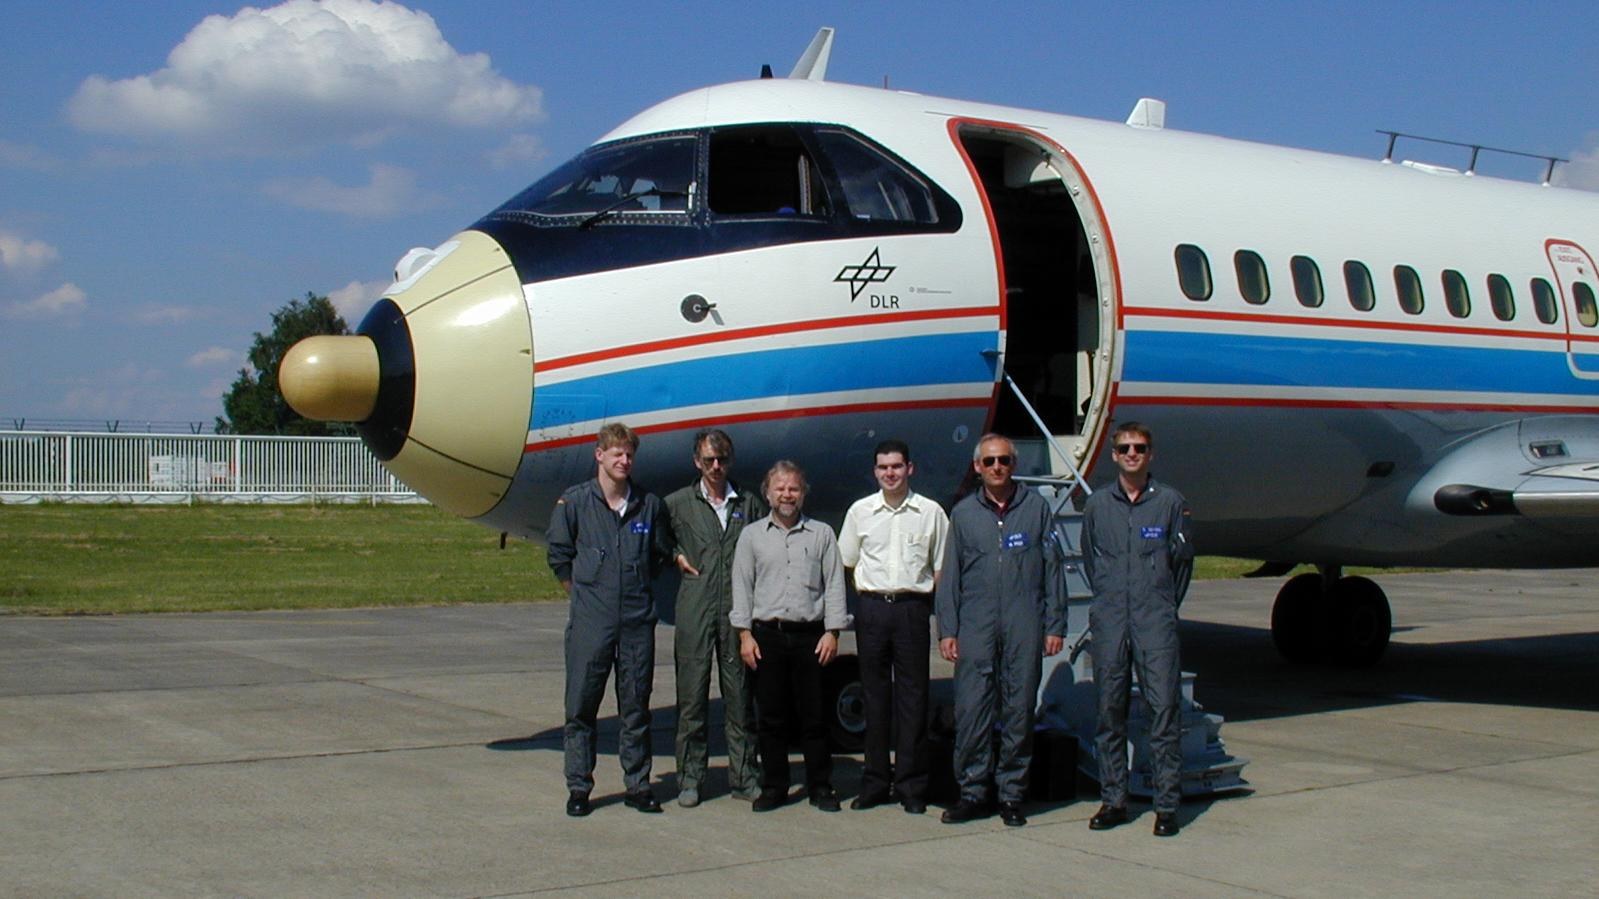 Landing regardless of weather conditions: ATTAS and its crew in 1999